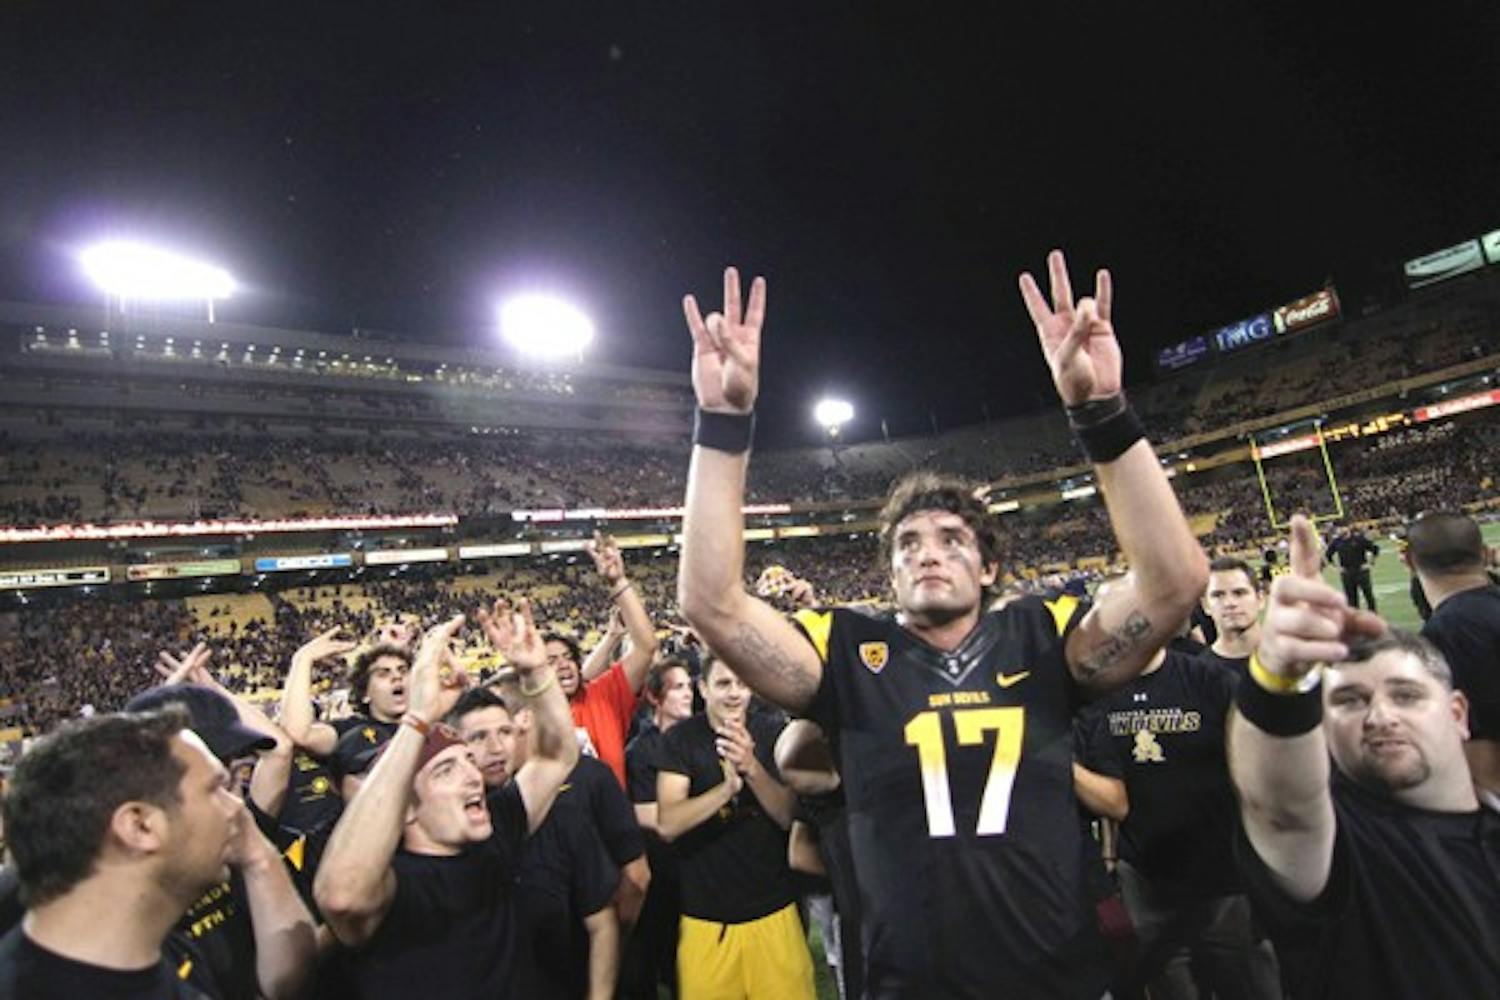 THE BIG ONE: ASU junior quarterback Brock Osweiler celebrates with the student section after the Sun Devils’ OT win over Missouri on Sept. 9. Saturday’s game against Oregon is shaping up to be the biggest regular-season game of the year. (Photo by Lisa Bartoli)